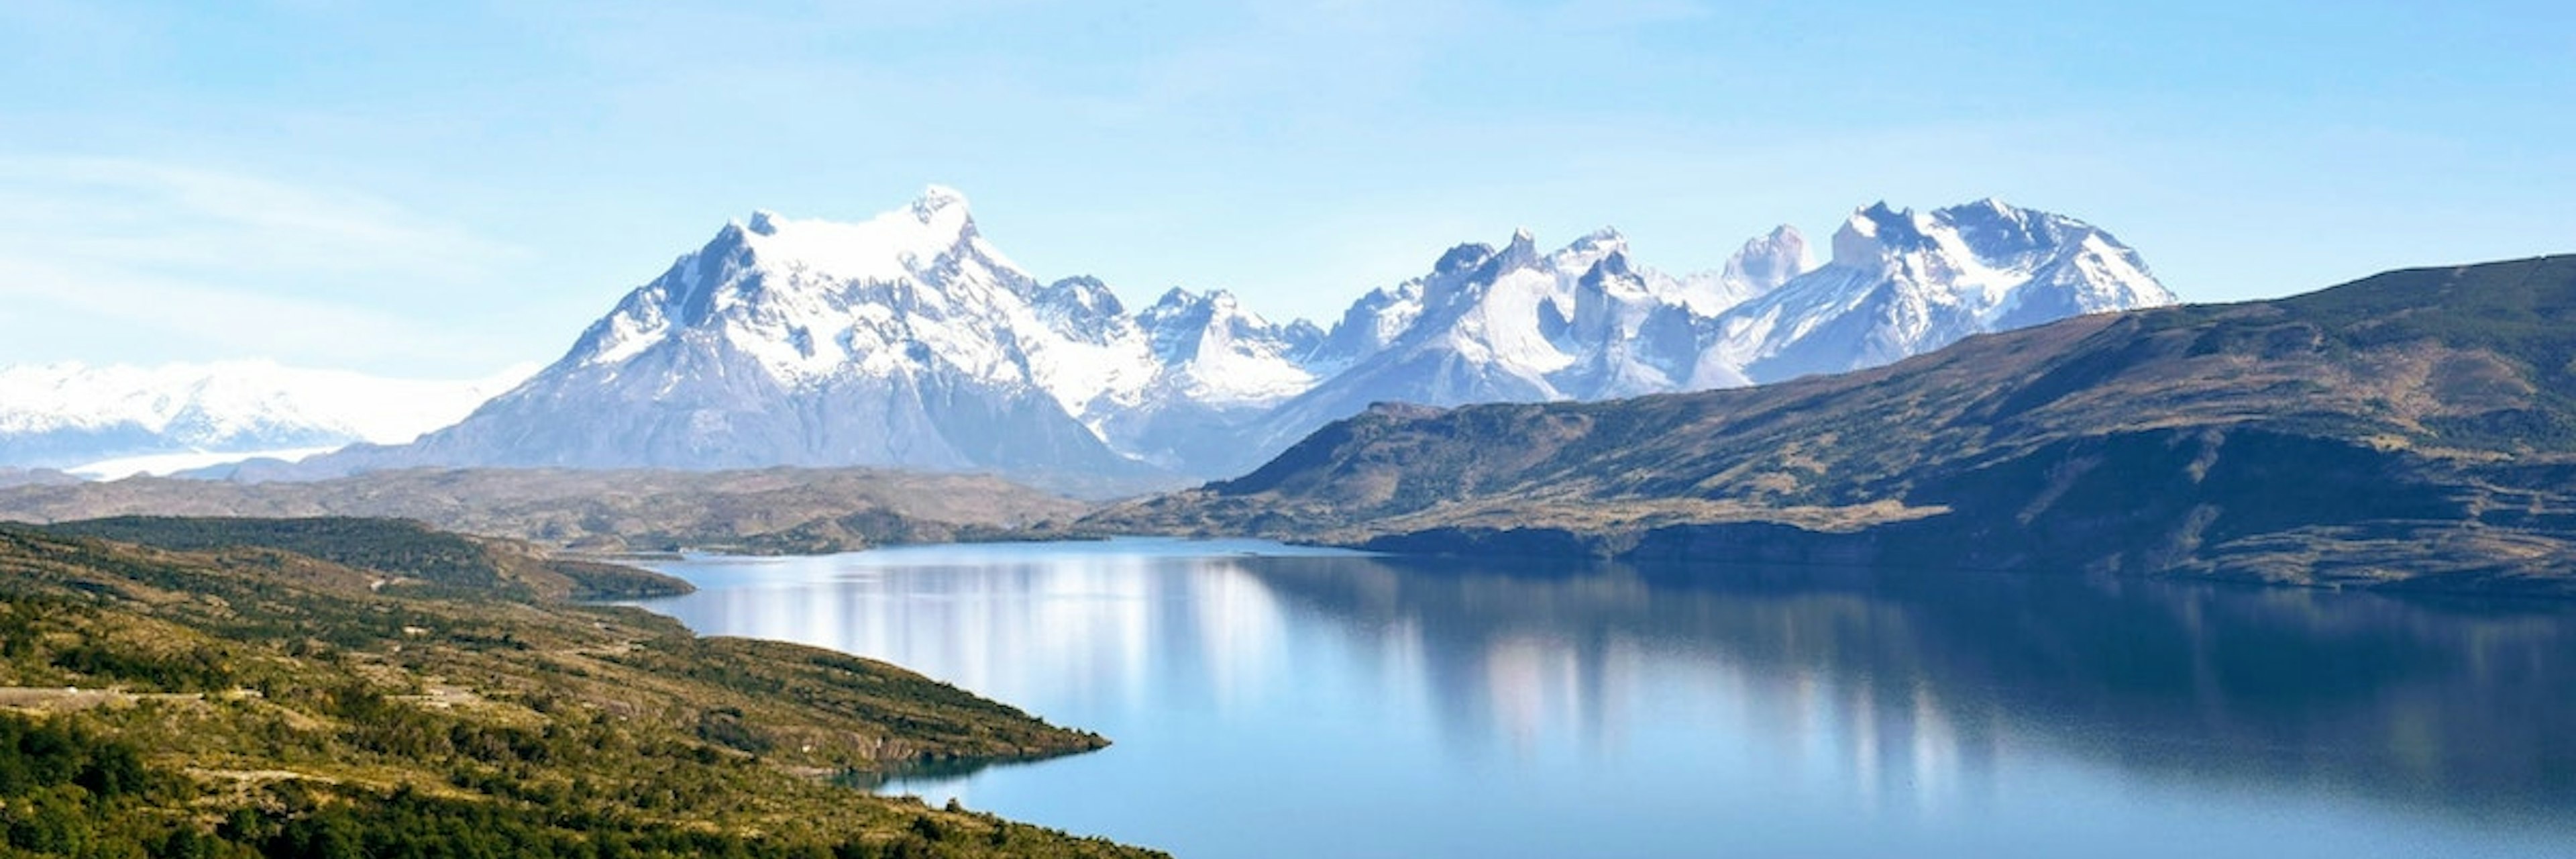 Photo of Torres del Paine National Park mountains